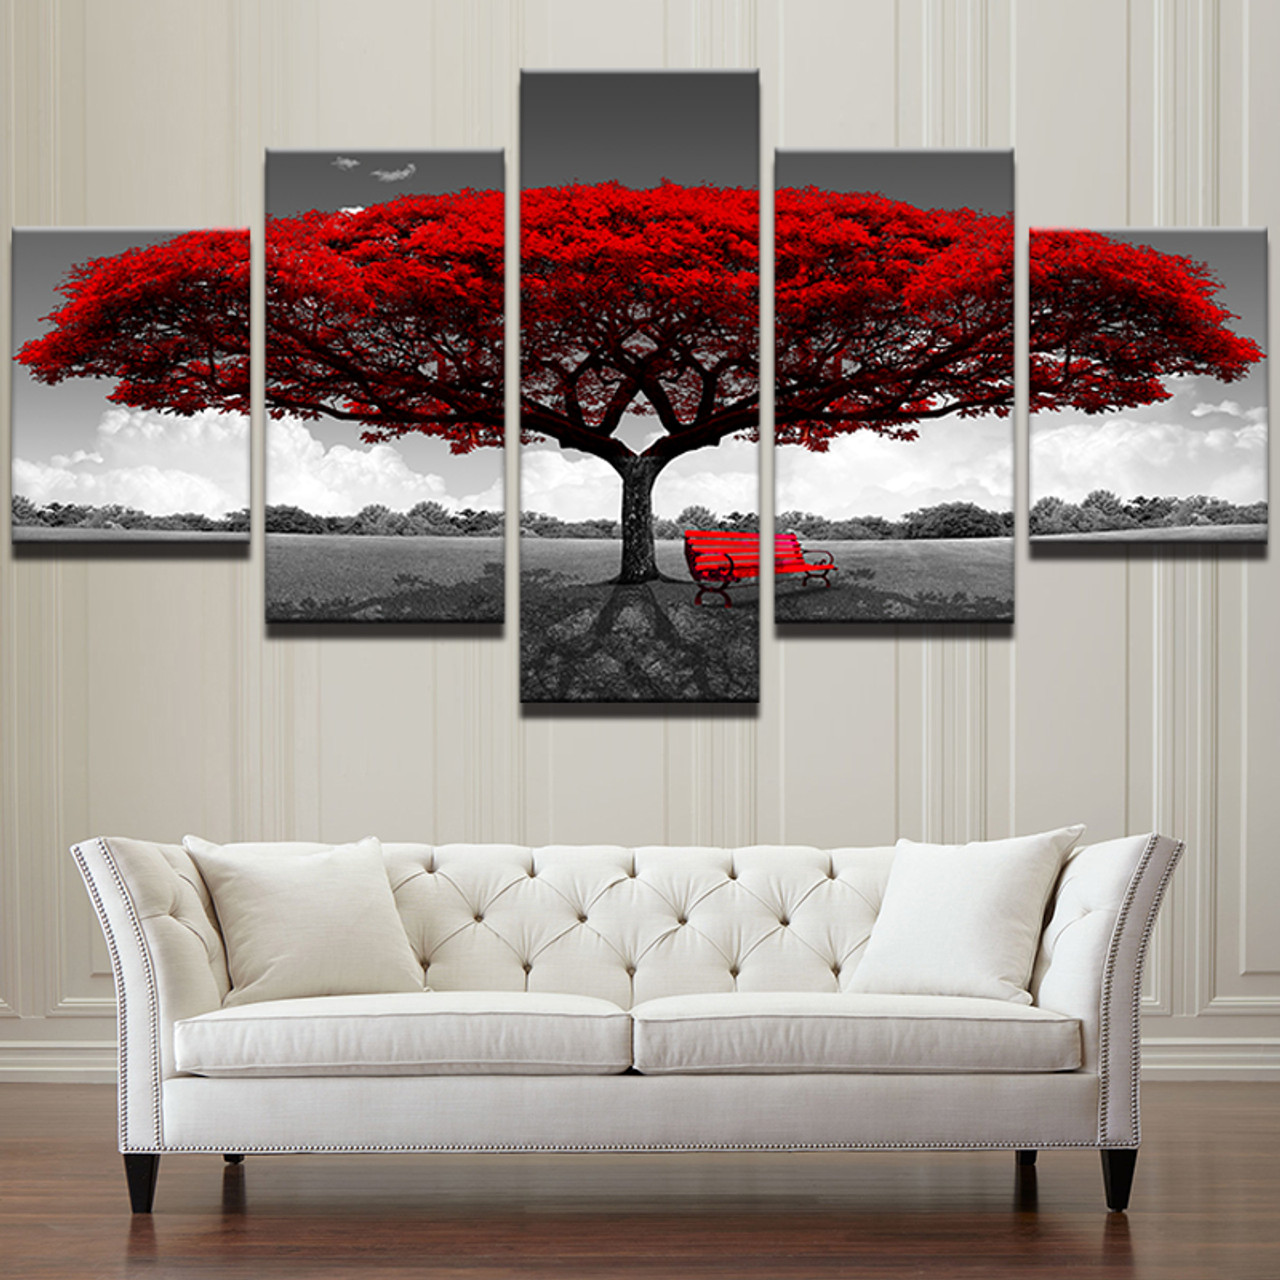 Modular Canvas Hd Prints Posters Home Decor Wall Art Pictures 5 Pieces Red Tree Art Scenery Landscape Paintings Framework Pengda Onshopdeals Com